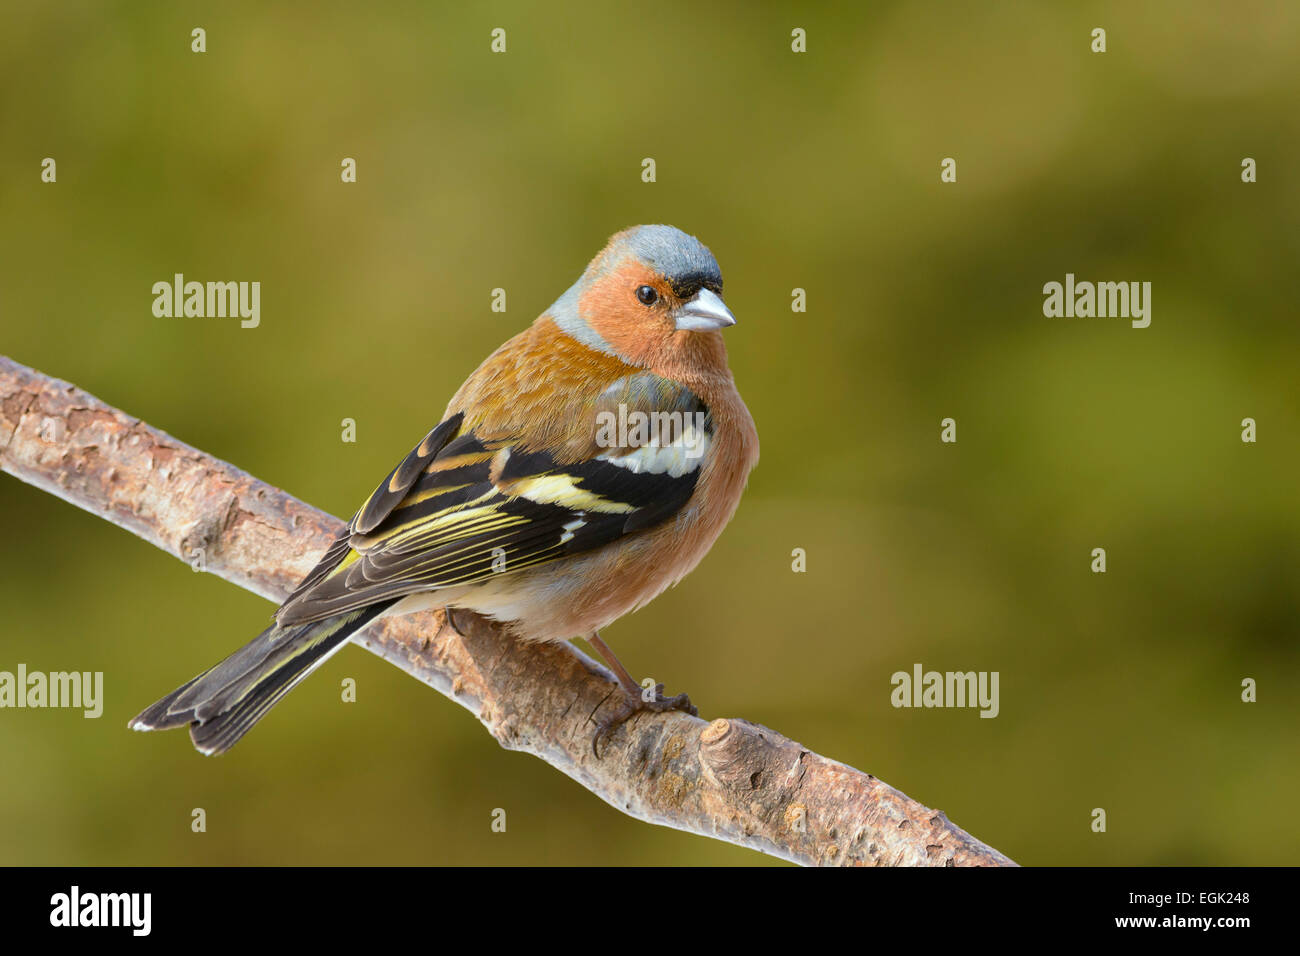 Chaffinch (Fringilla coelebs) on tree branch, Thuringian Forest, Thuringia, Germany Stock Photo